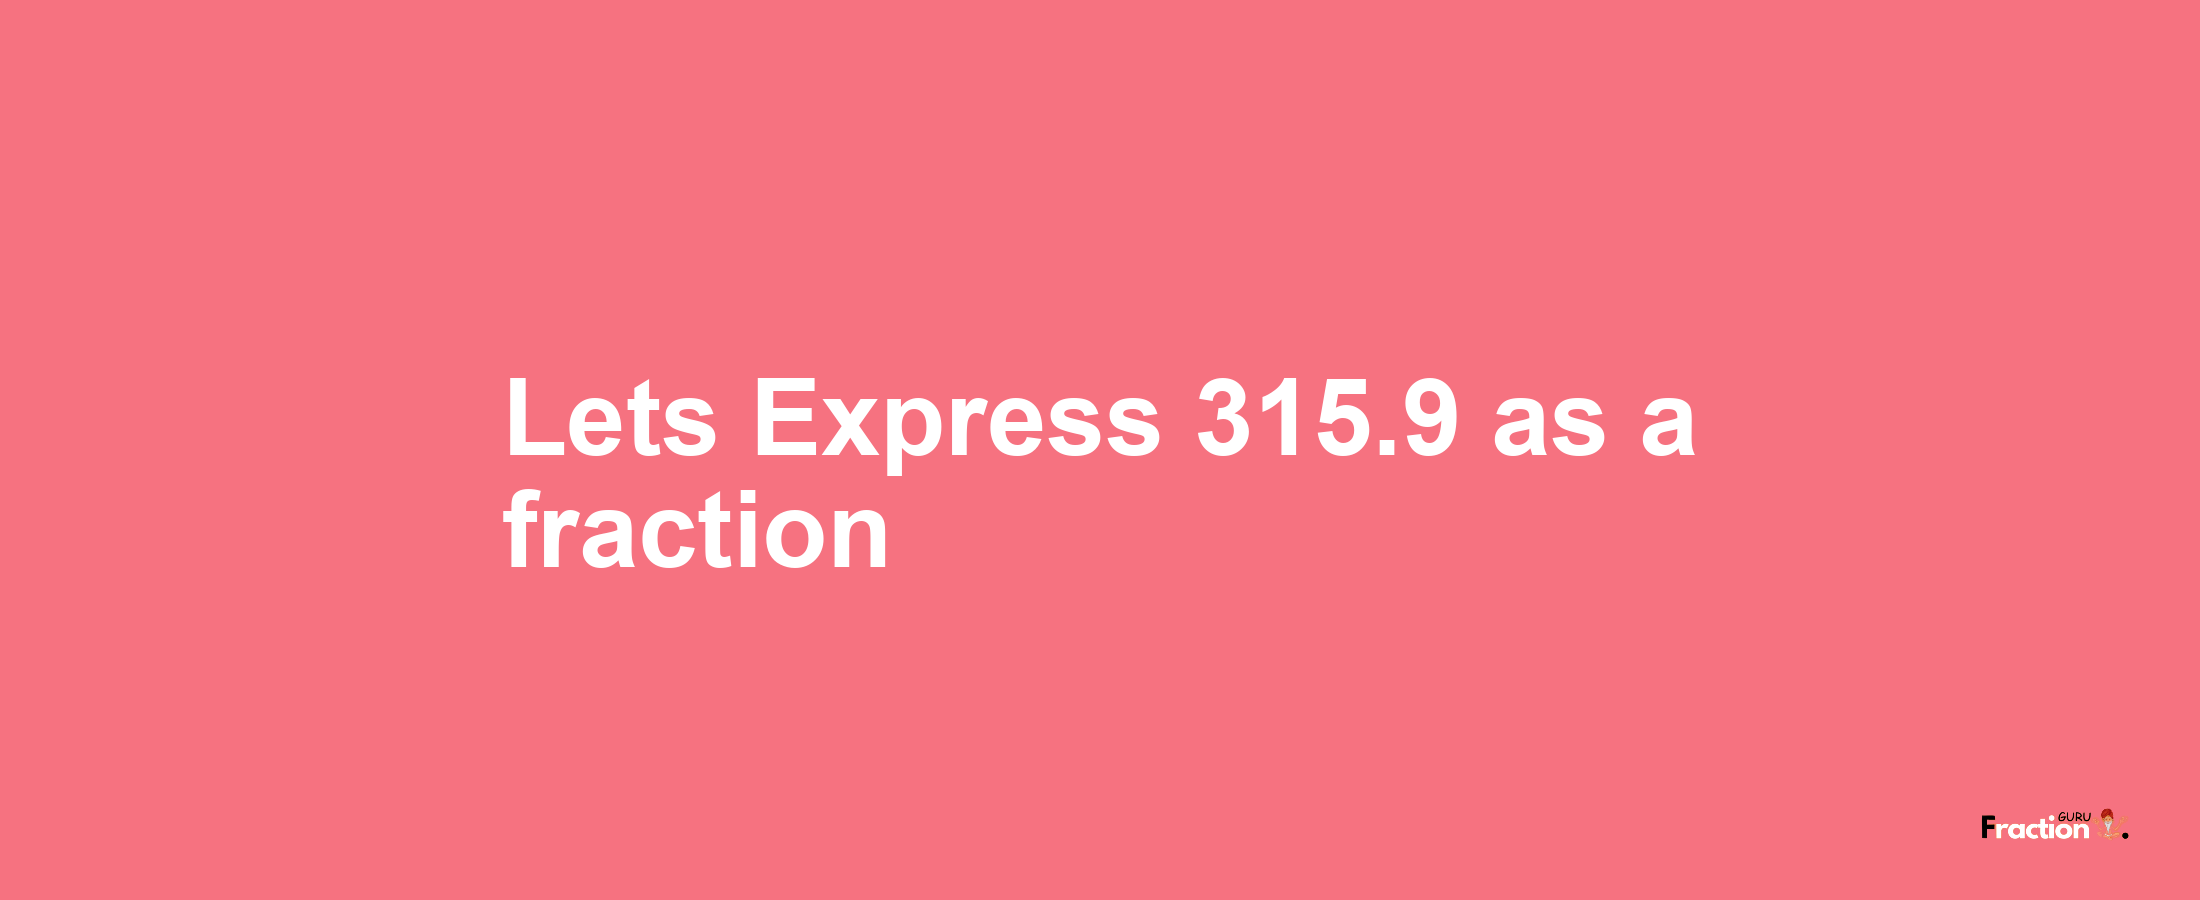 Lets Express 315.9 as afraction